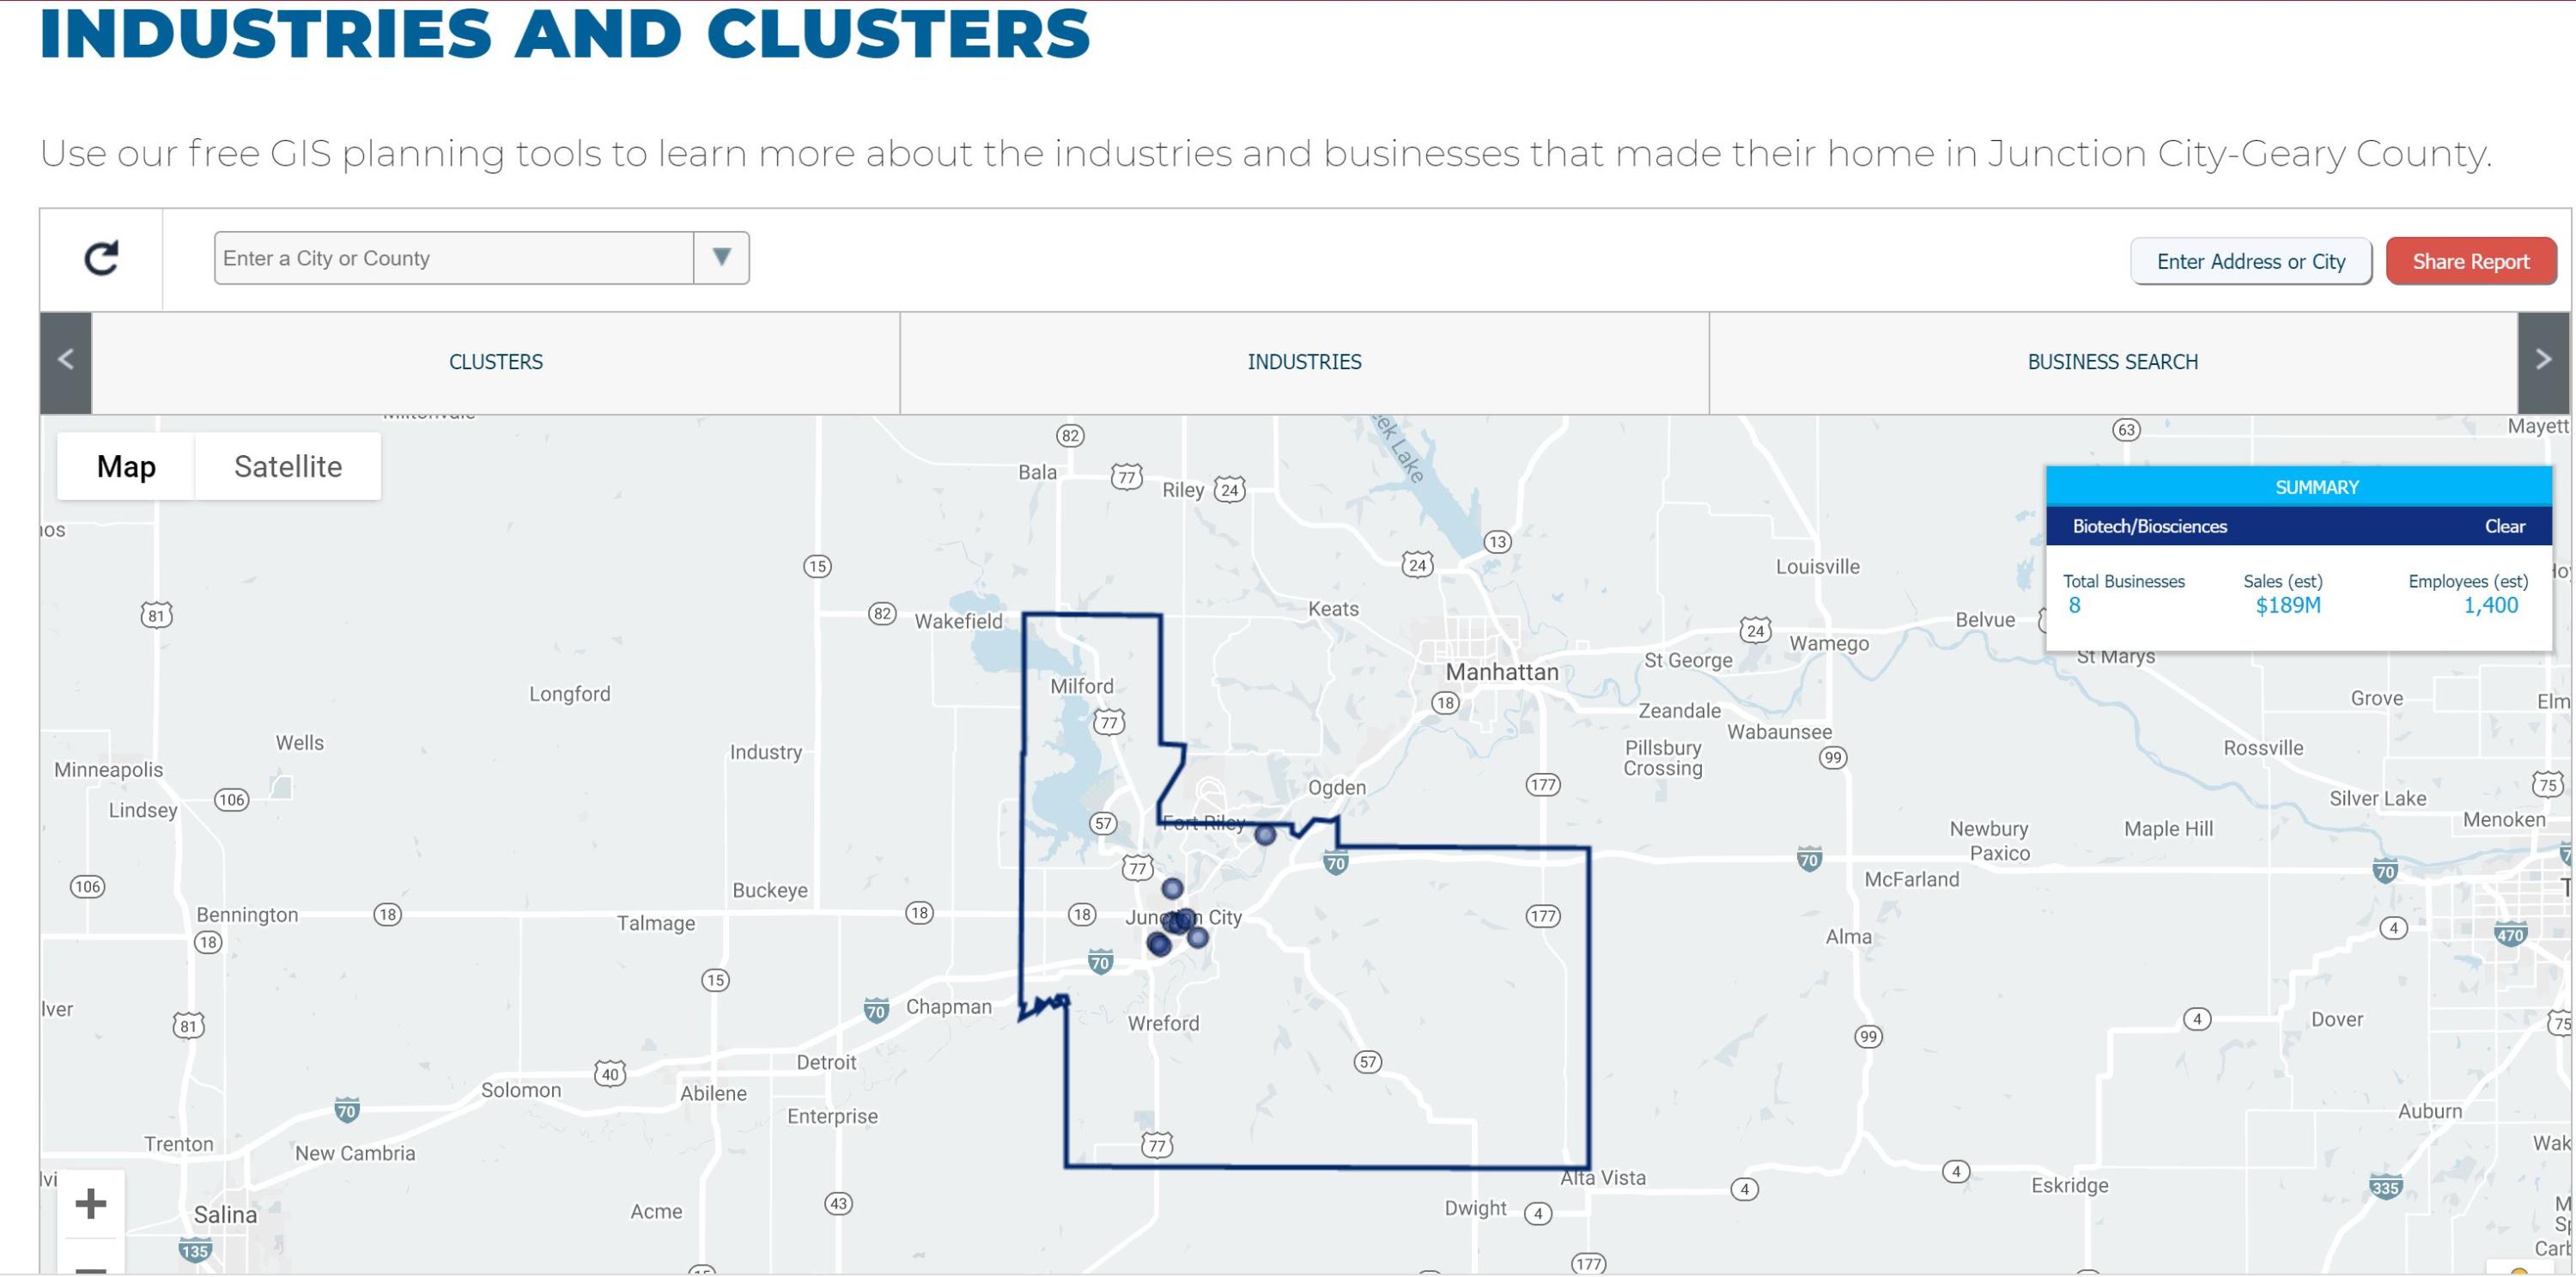 Industries and Clusters in Junction City